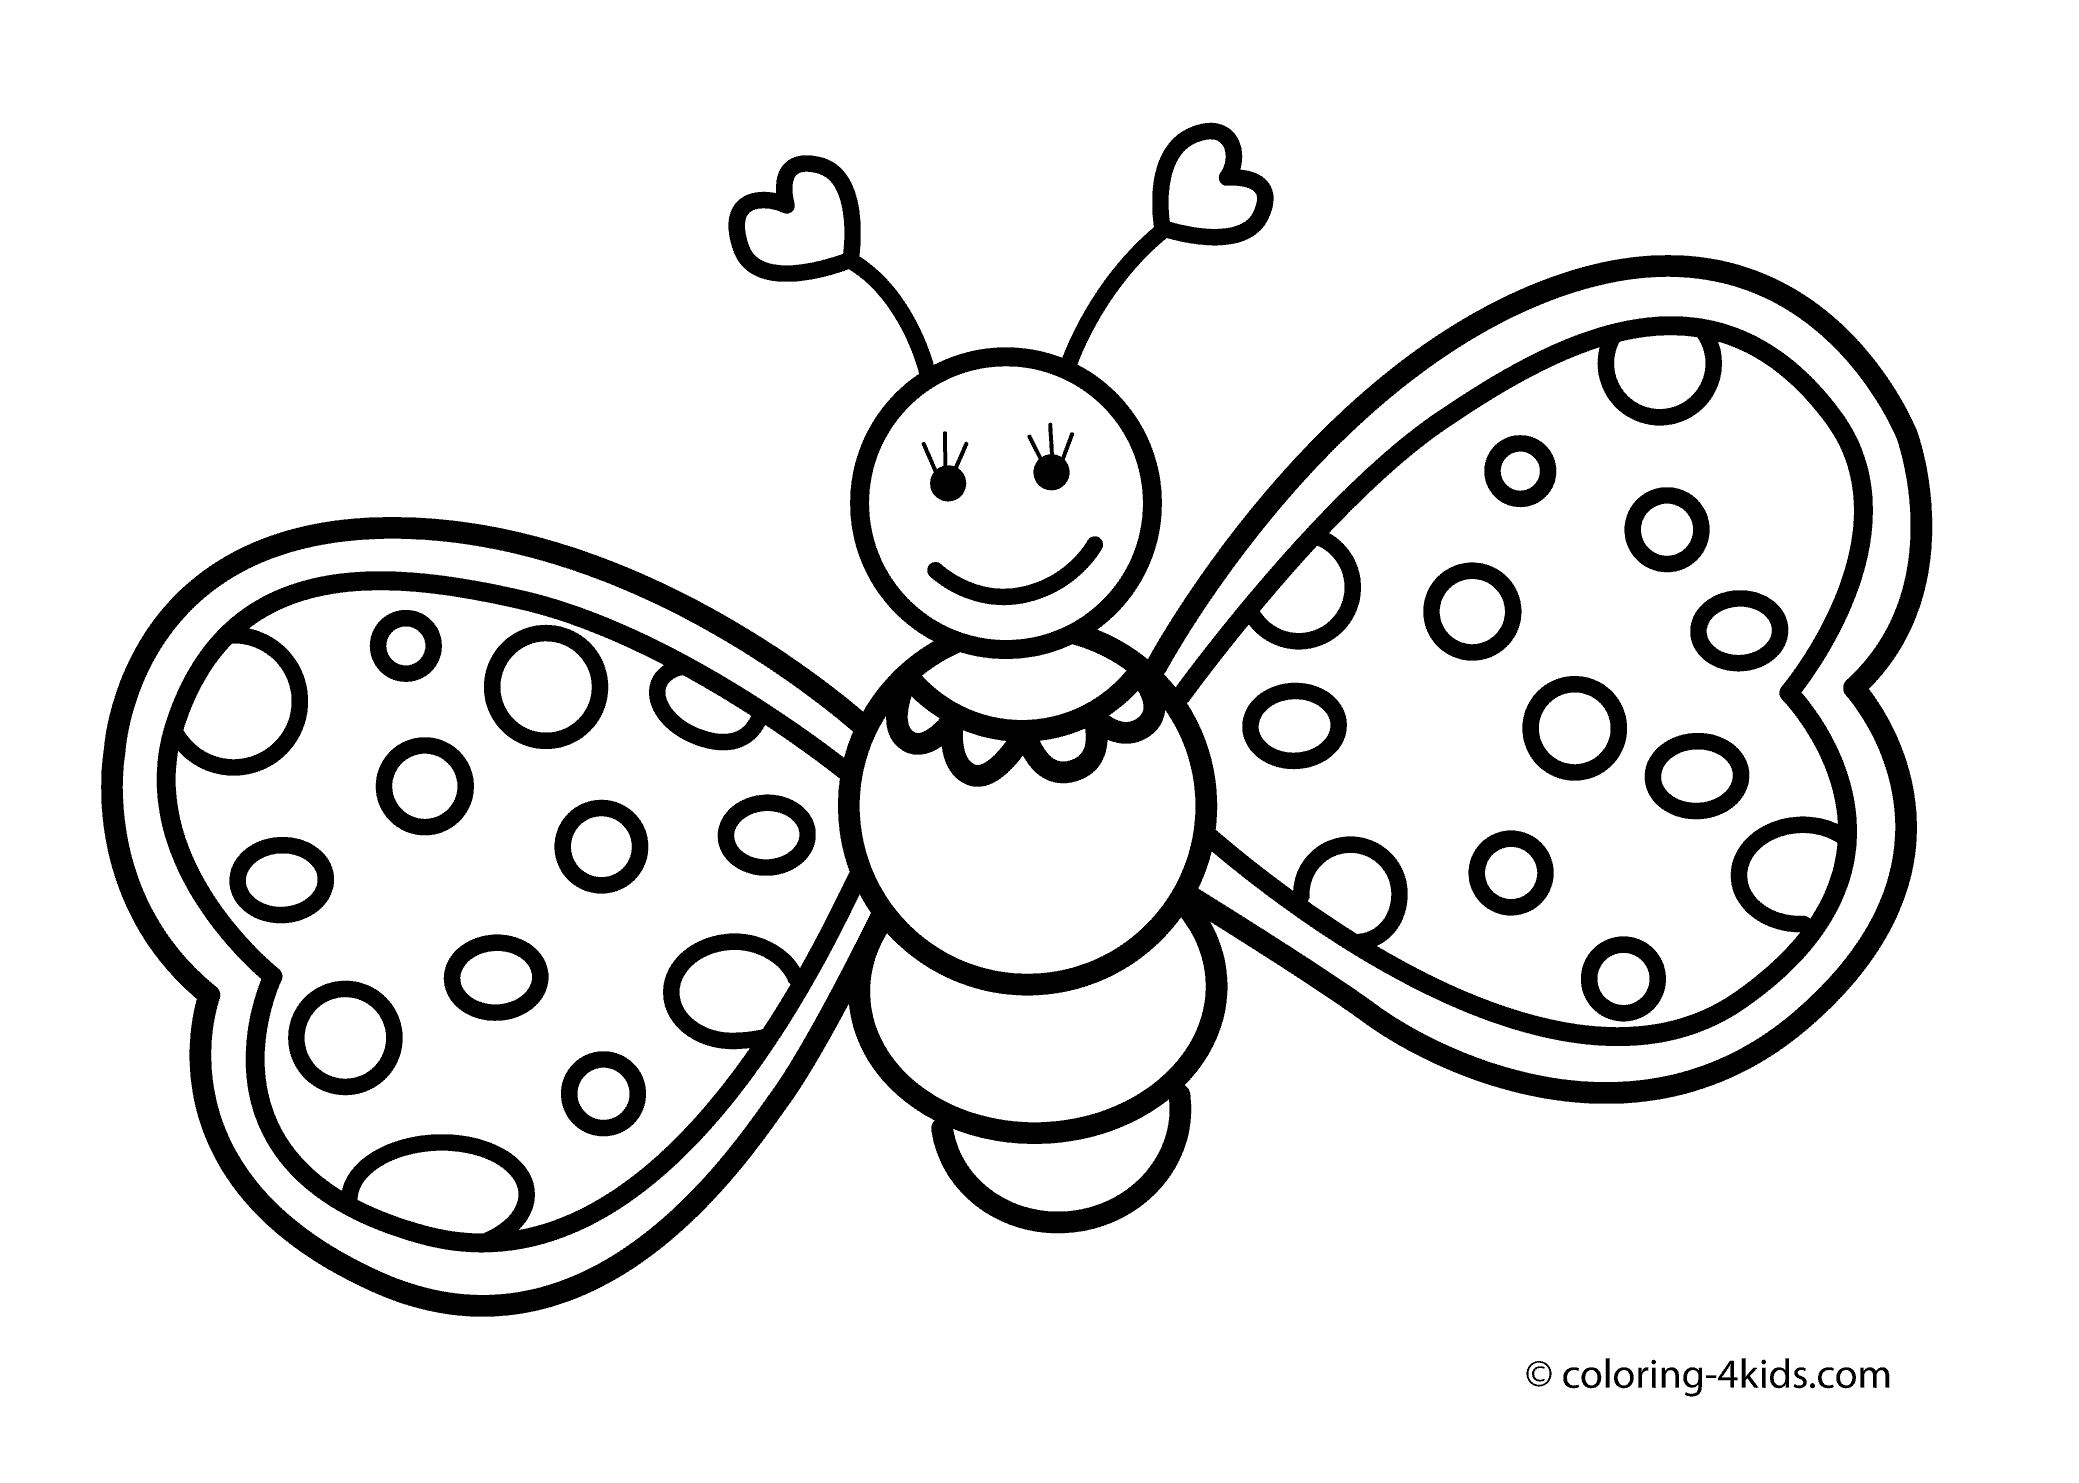 Butterfly Coloring Book Pages   Coloring Pages For Kids And For ...